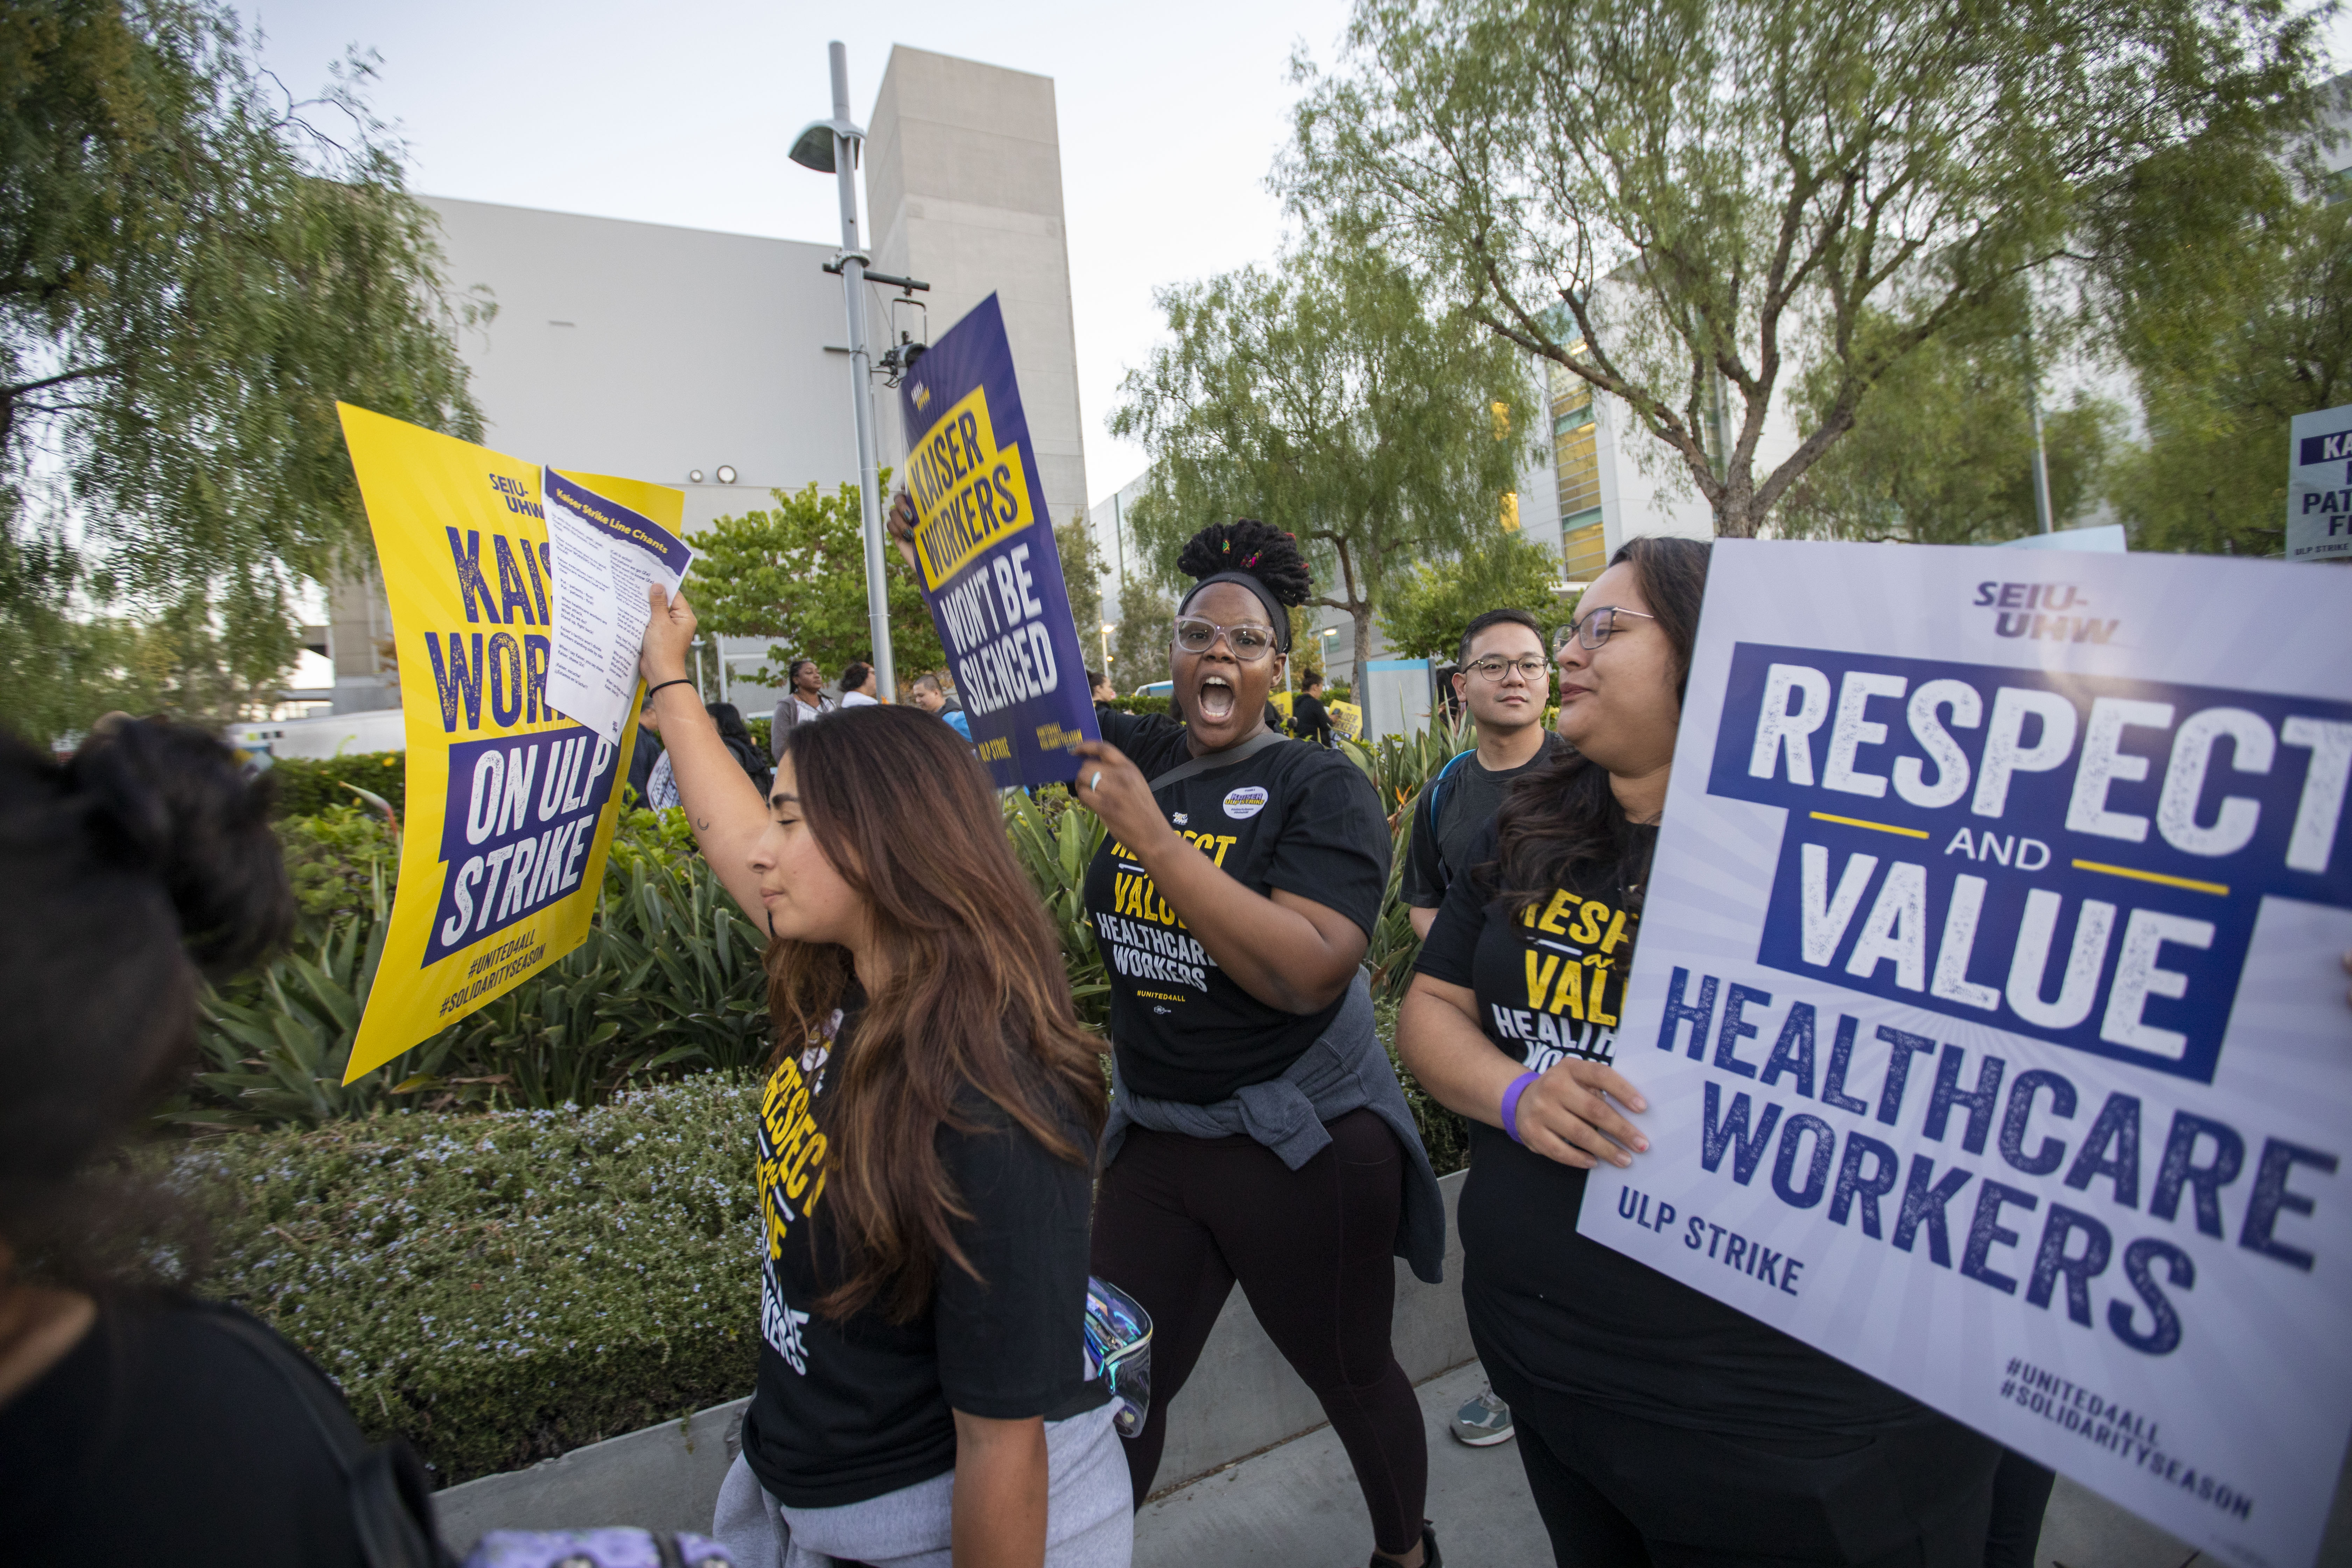 Protesters marching outside a Los Angeles Kaiser facility on October 4 carry signs that read “Respect and value health care workers.”